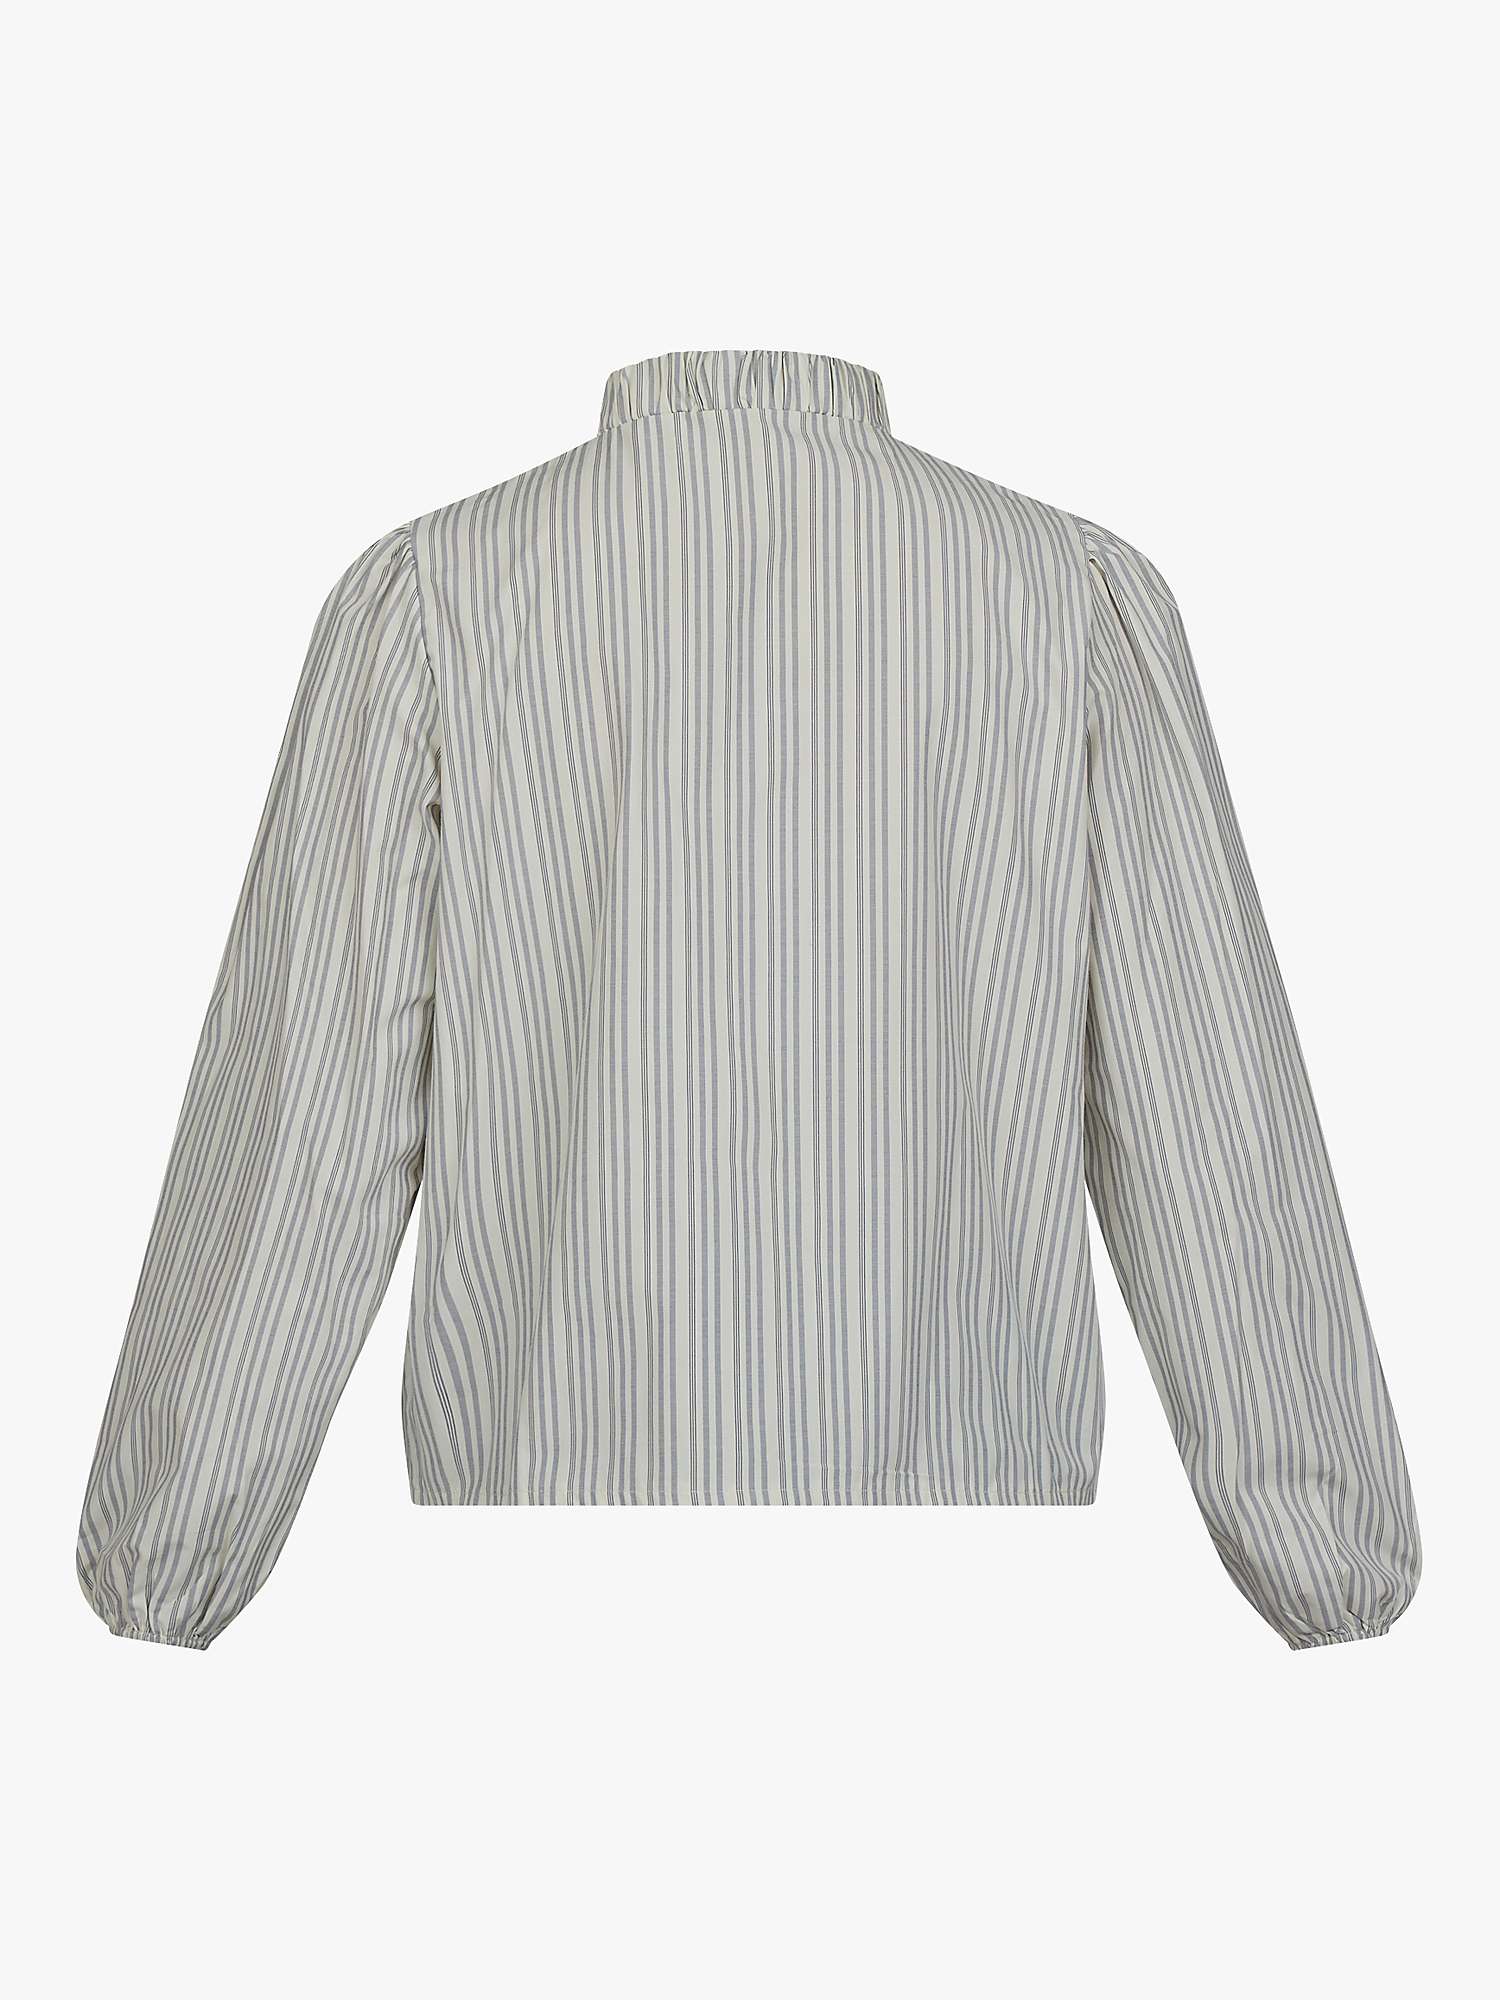 Buy Sisters Point Wrinkle High Collar Shirt Online at johnlewis.com